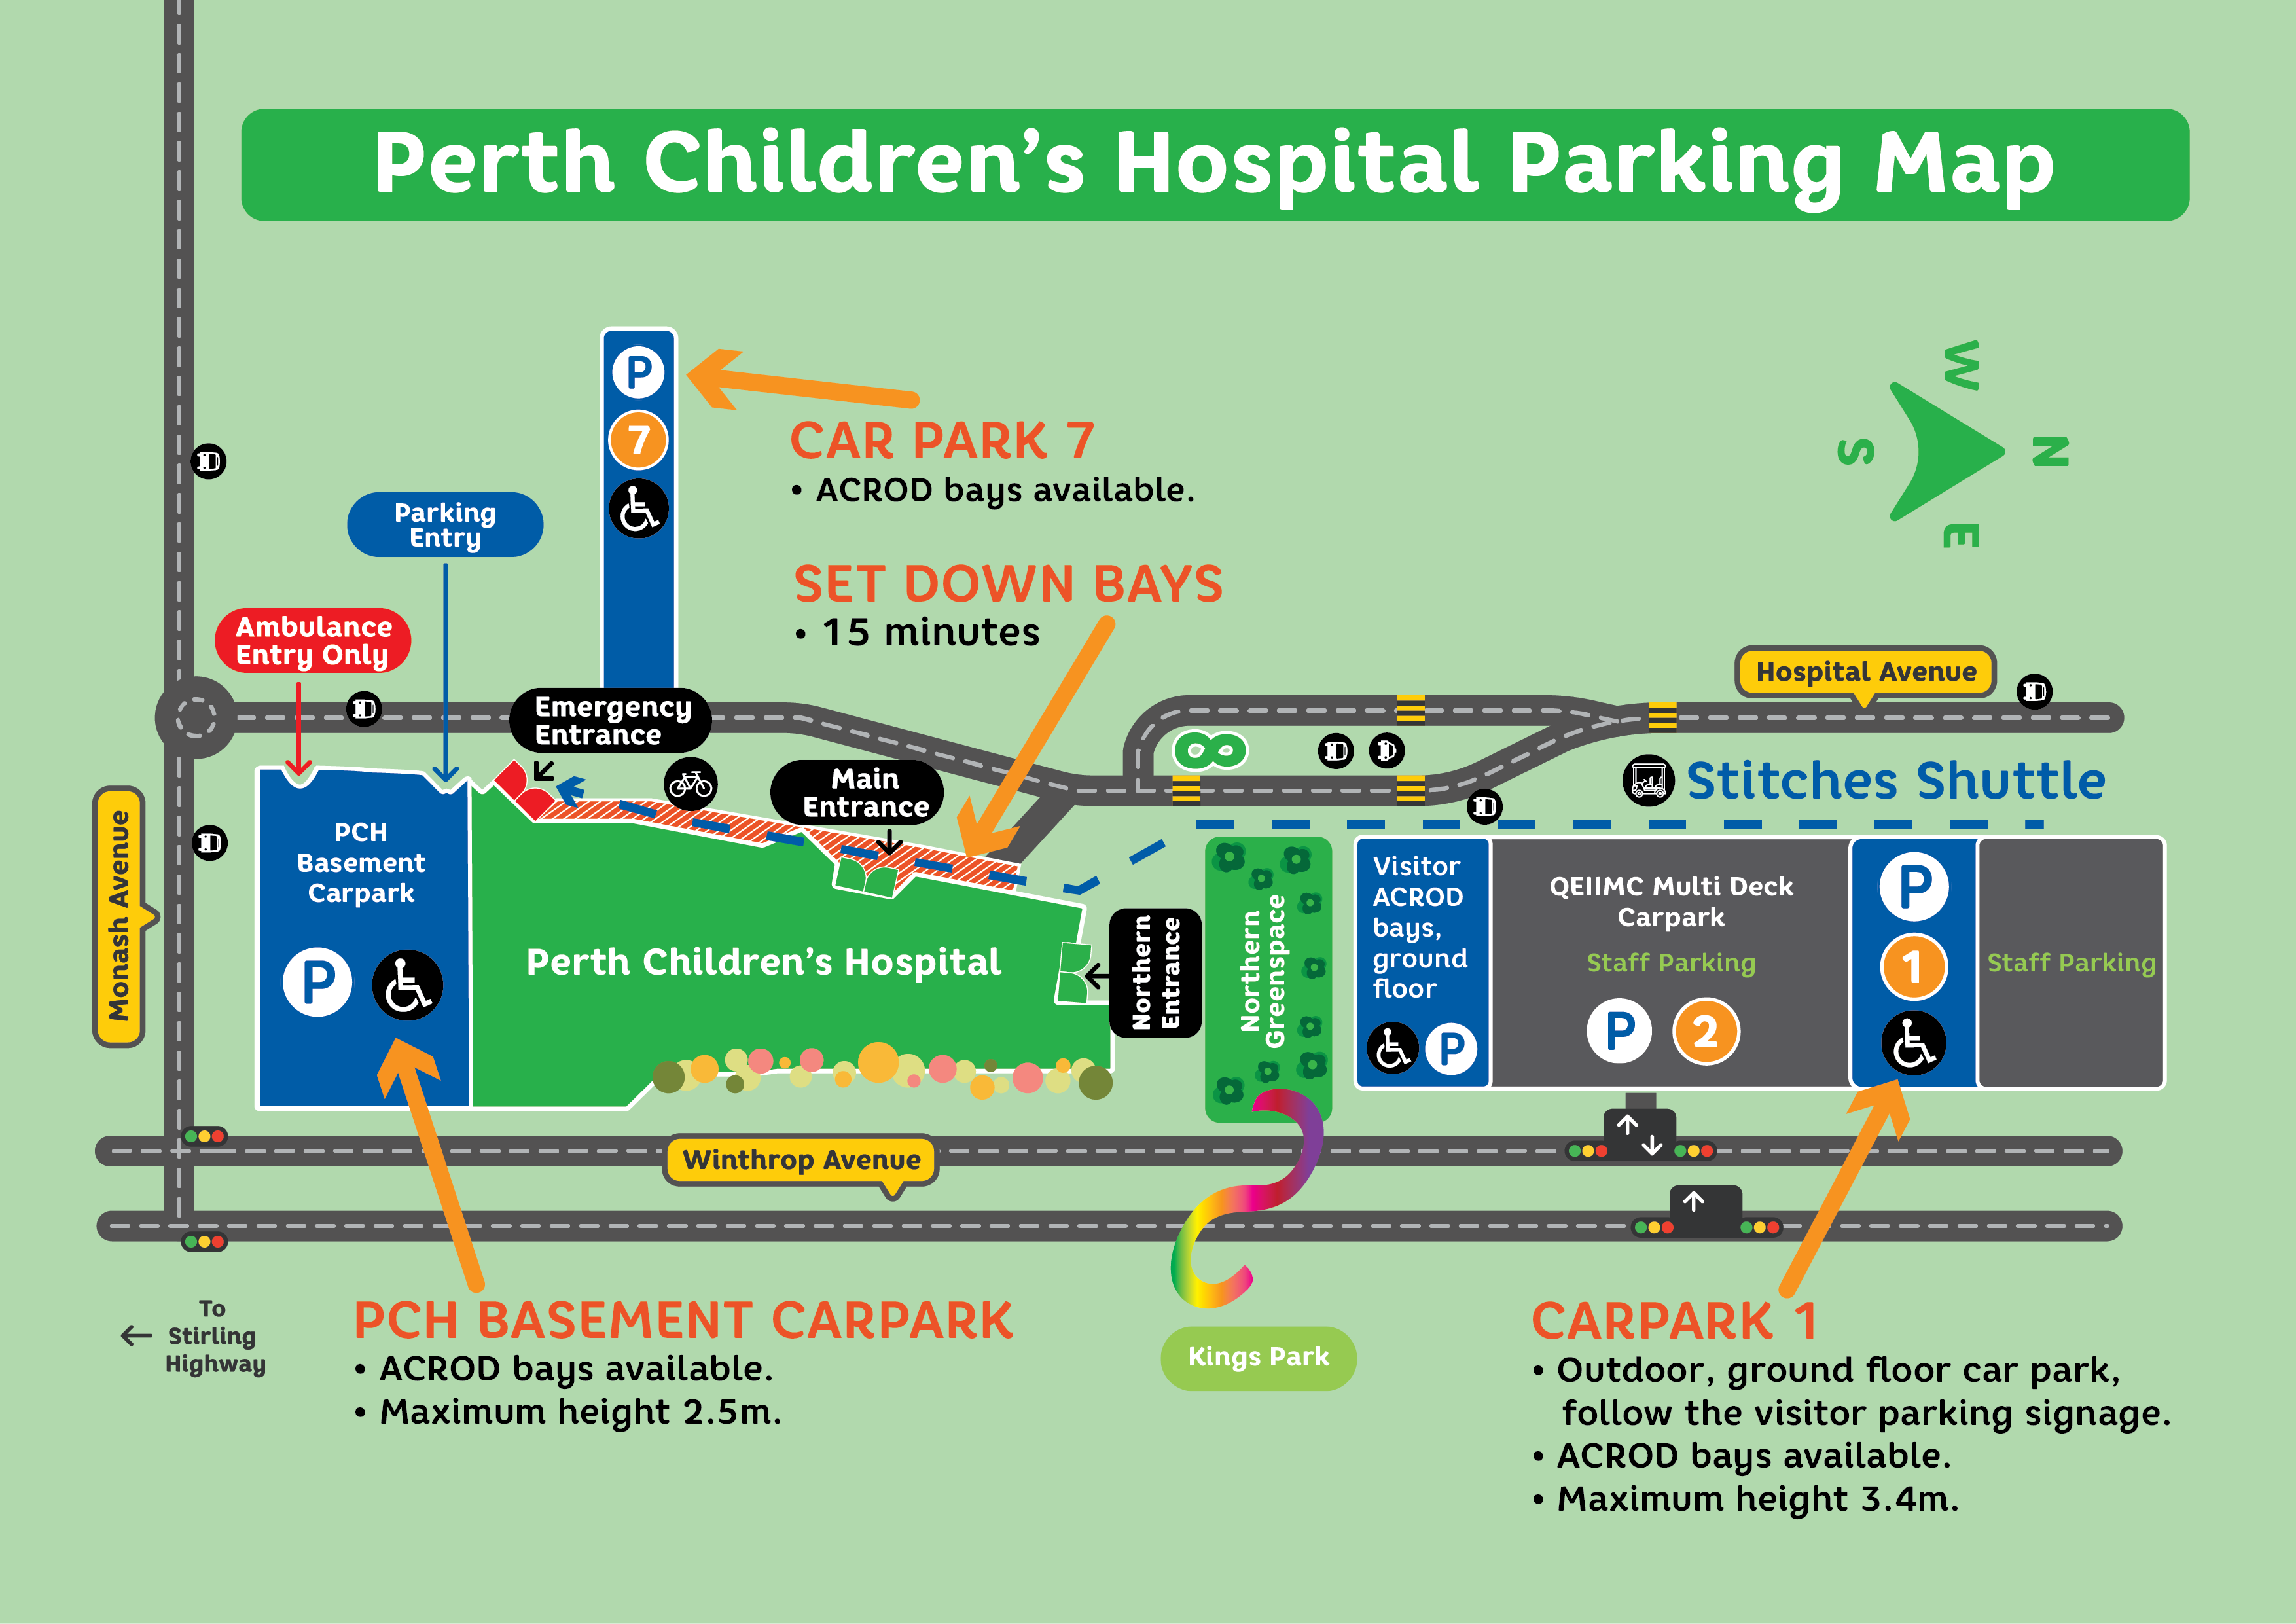 Map of carparks for PCH